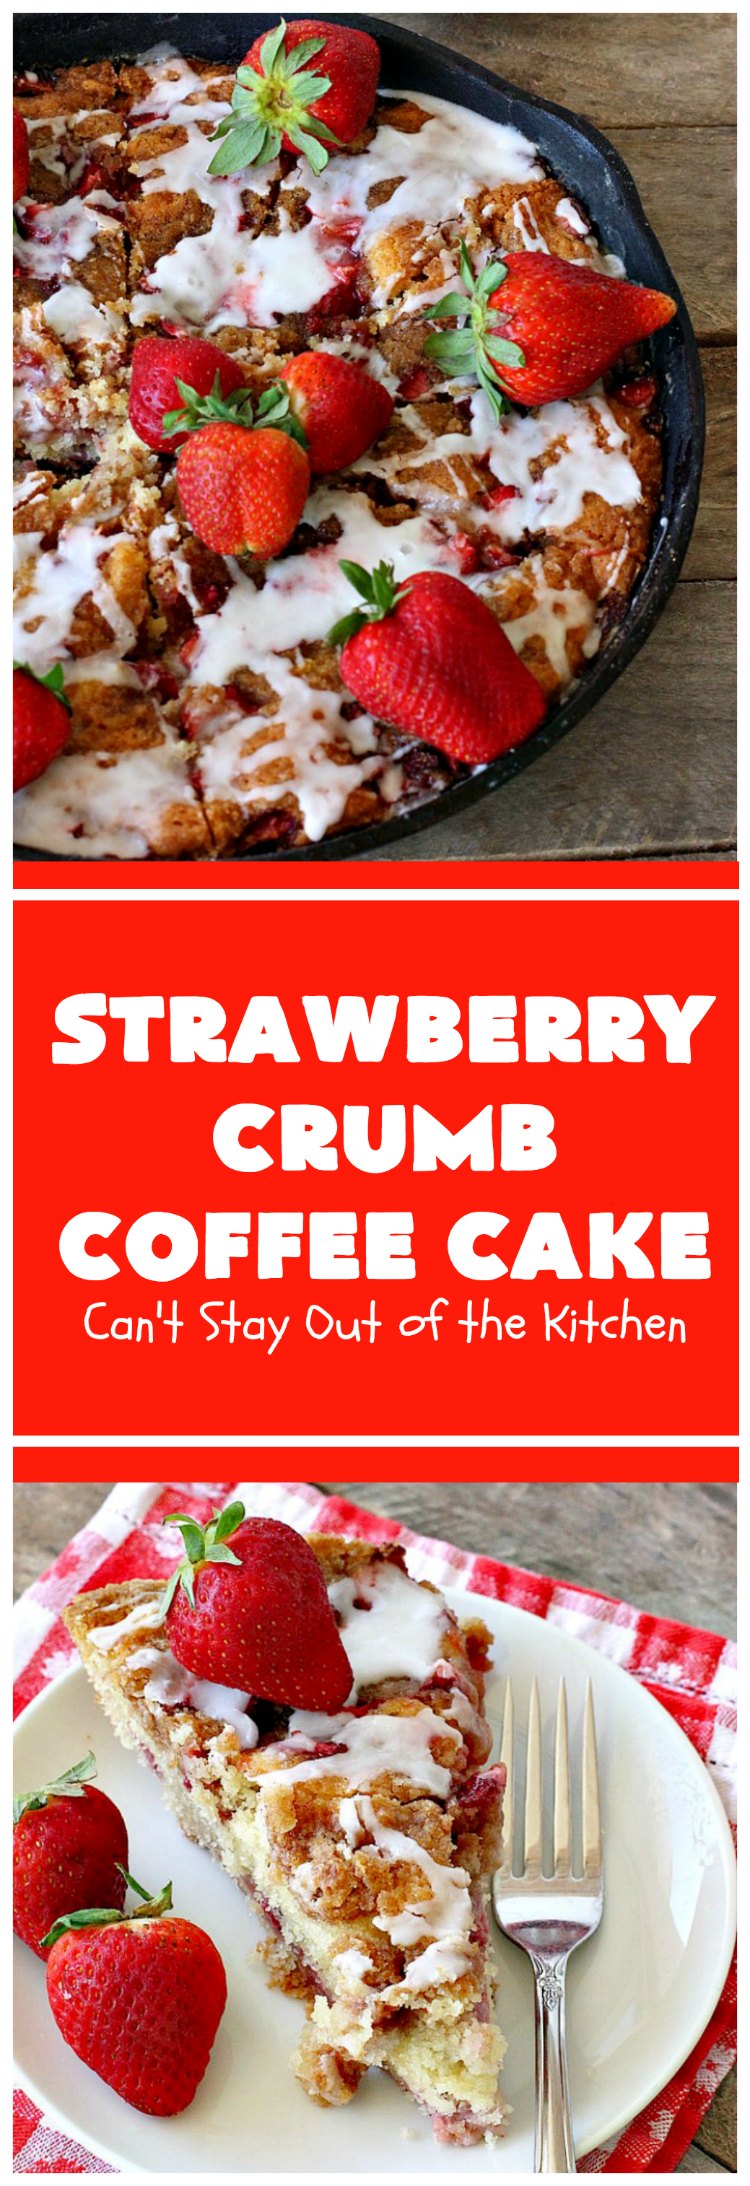 Strawberry Crumb Coffee Cake | Can't Stay Out of the Kitchen